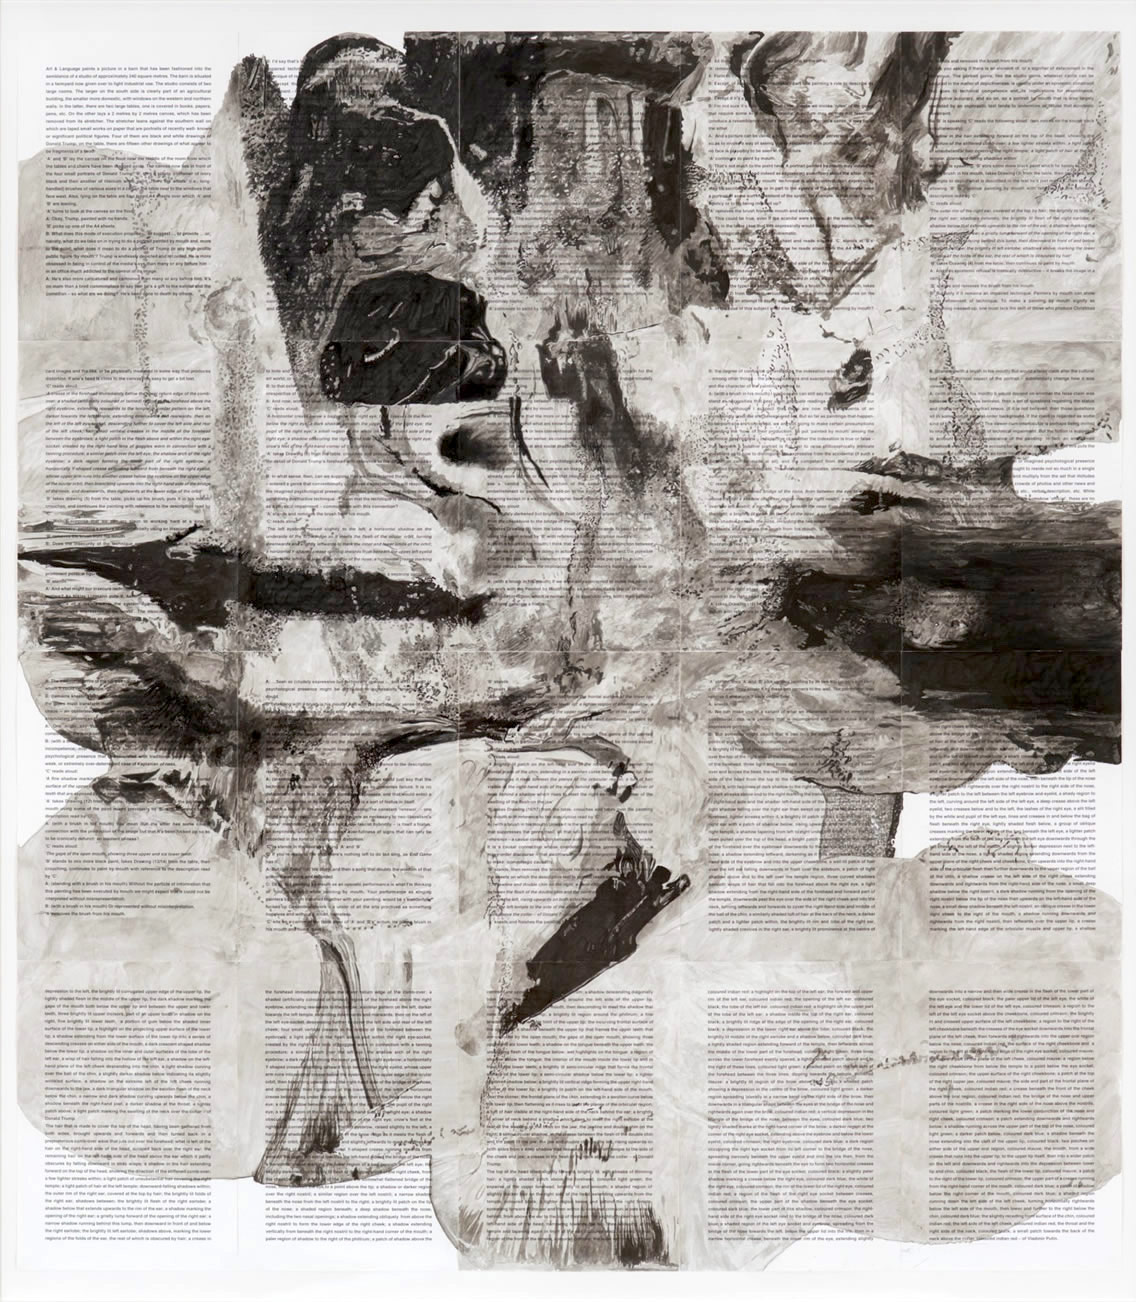 Art & Language: A Shadow on the Tongue. 20 A4 pages in a 5 x 4 format, (168 x 148 cm) 2019.